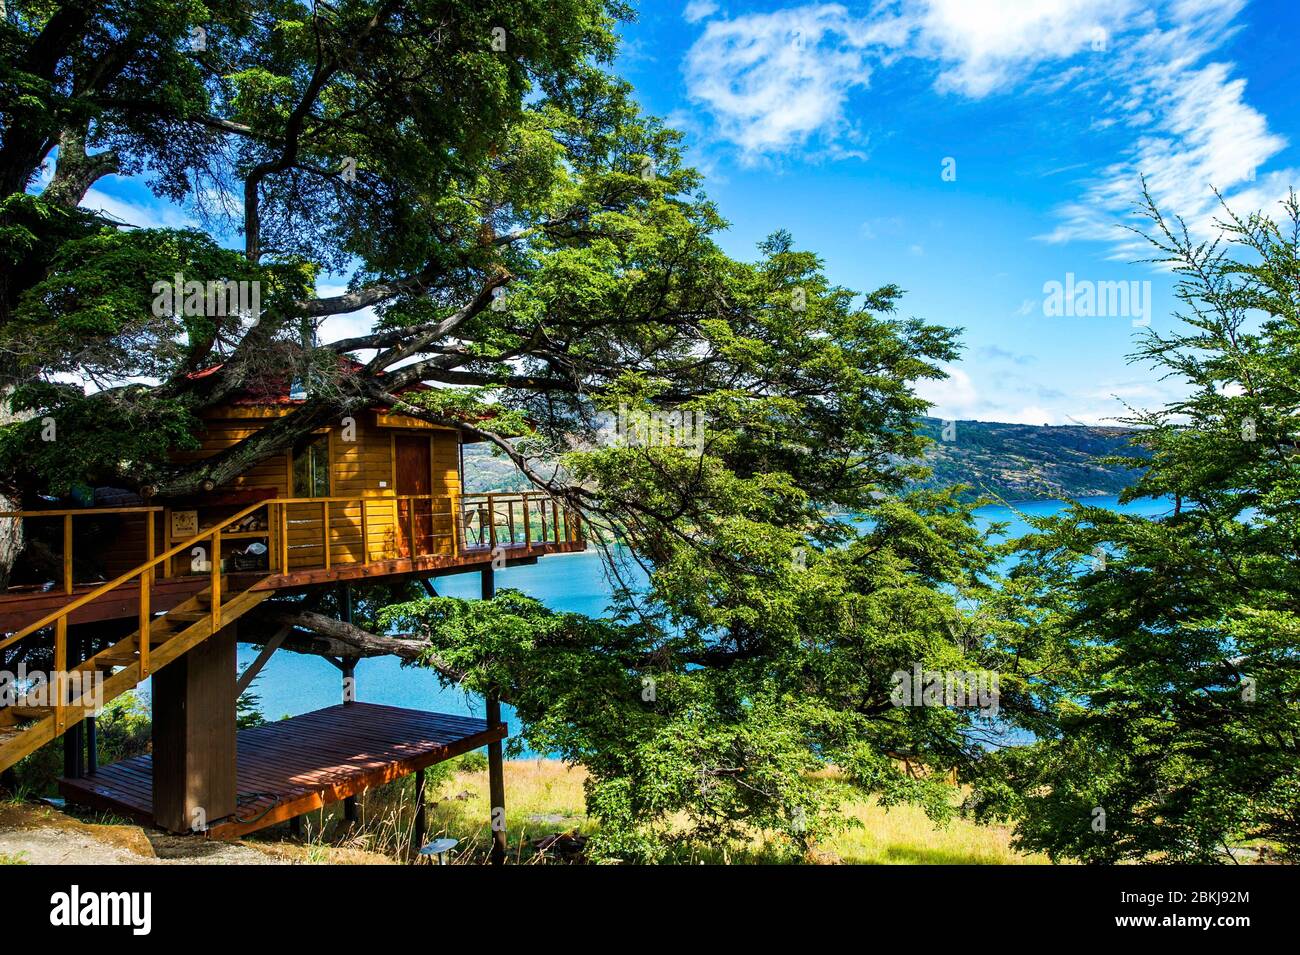 Chile, Patagonia, Aysen, Coyhaique, Puerto Guadal, Terra Luna Lodge, superb wooden arch anchored on the shores of General Carrera Lake Stock Photo